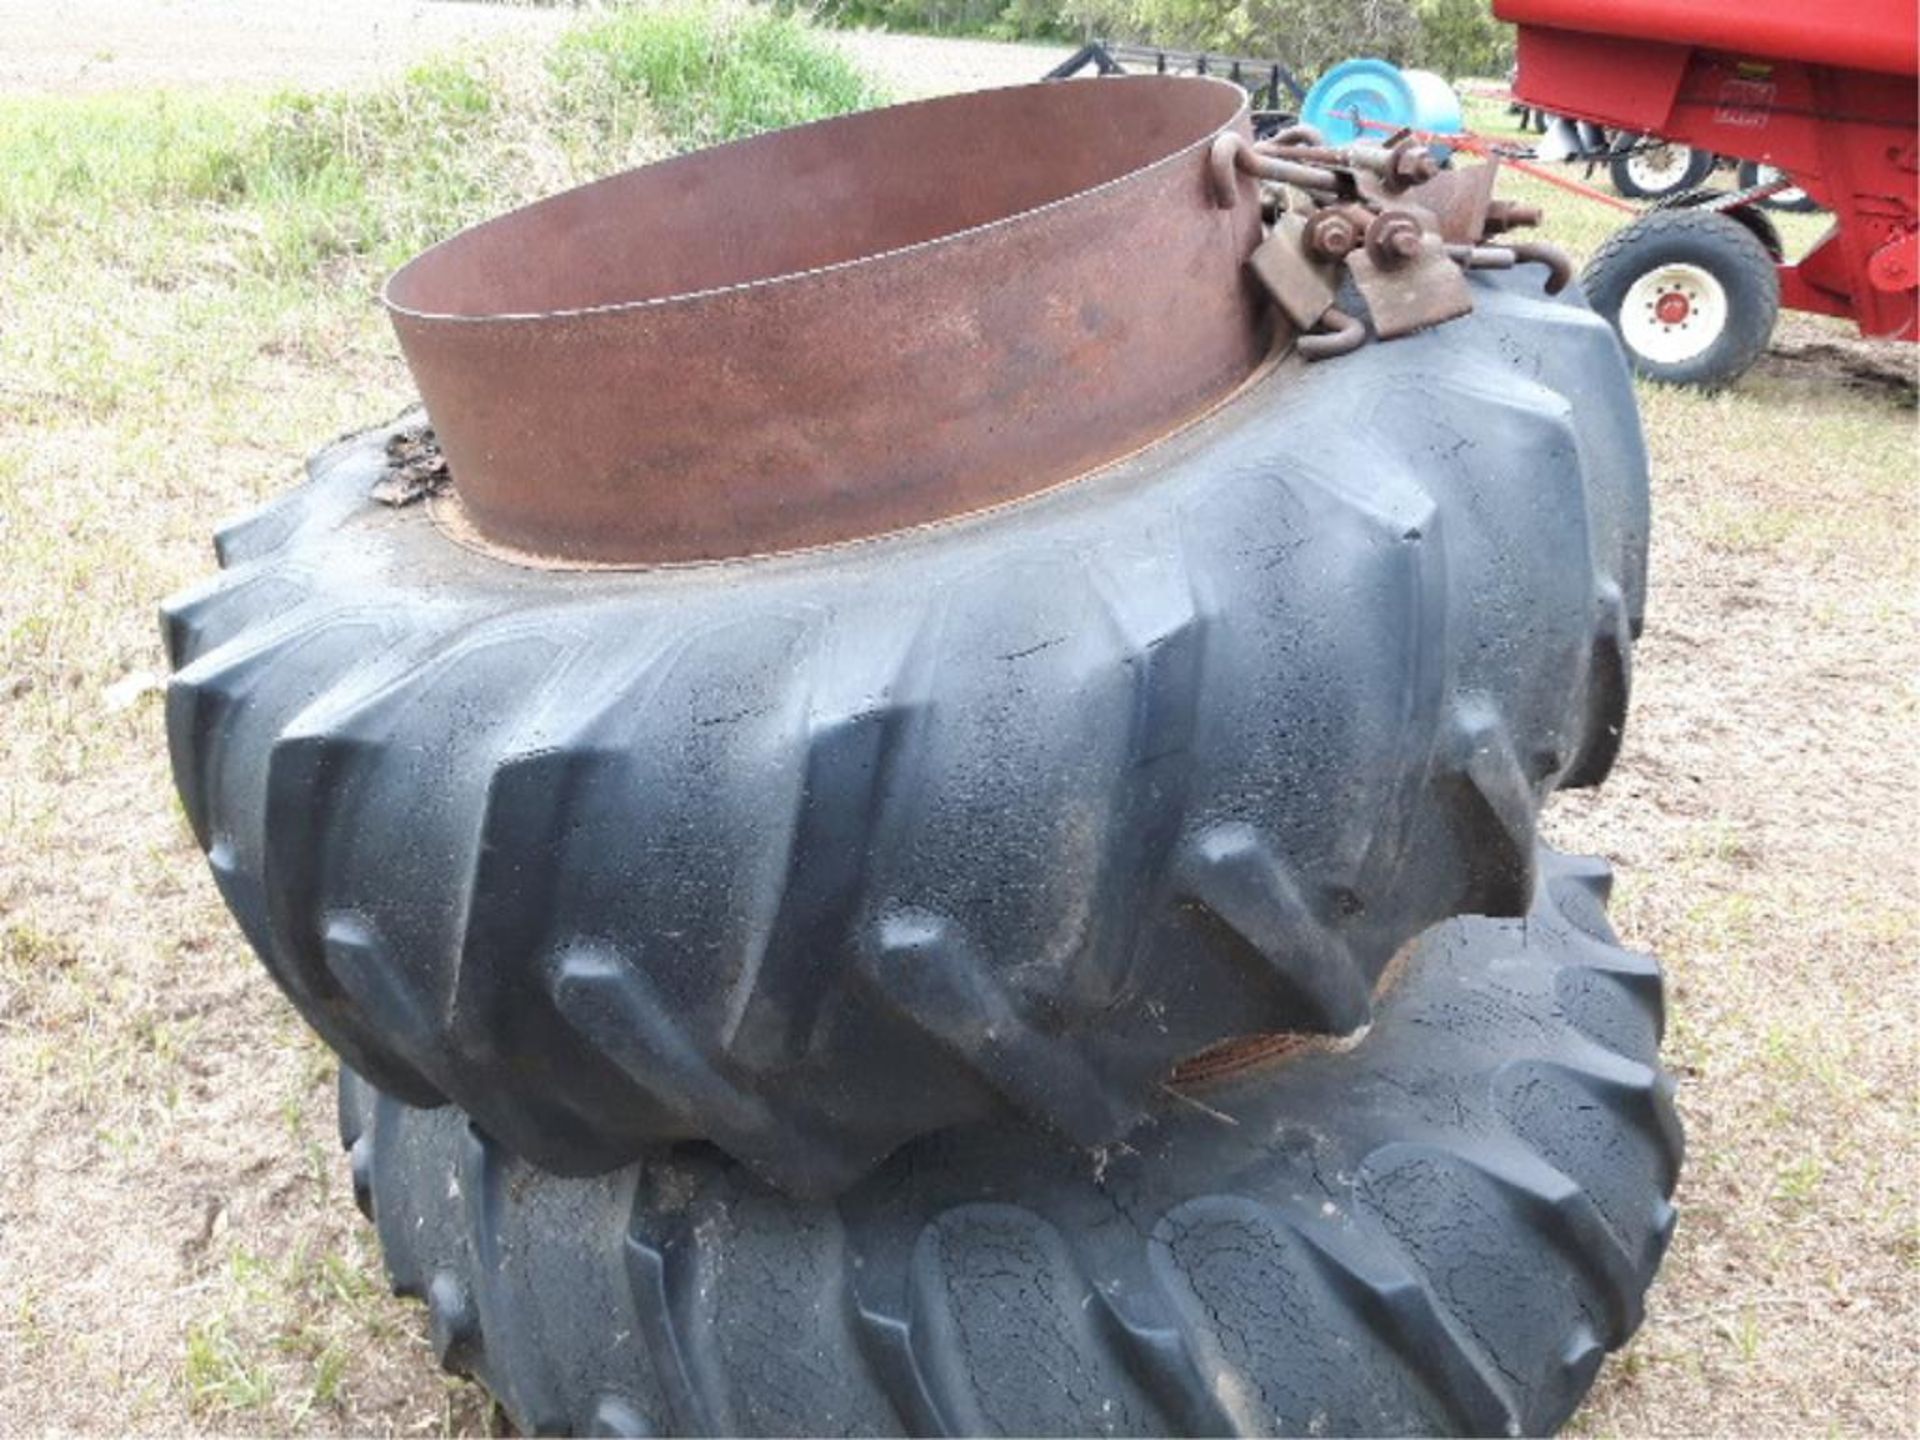 1973 970 Case 2WD Tractor - Image 5 of 9